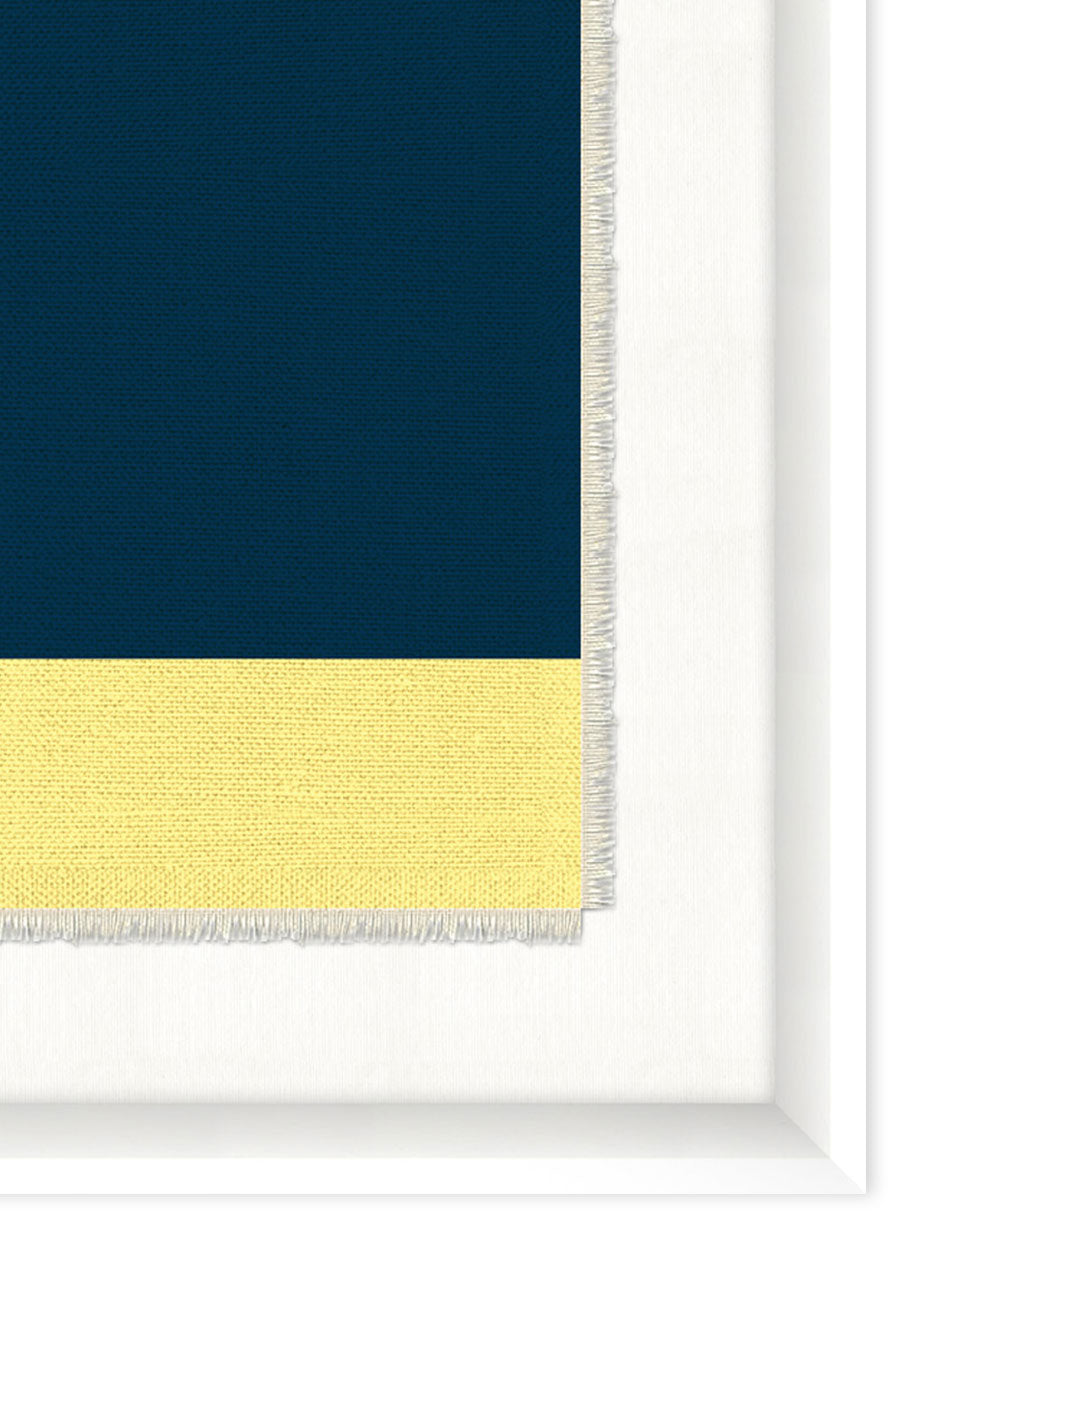 'Nautical Flag Textile 4' on Canvas by Nathan Turner Framed Art